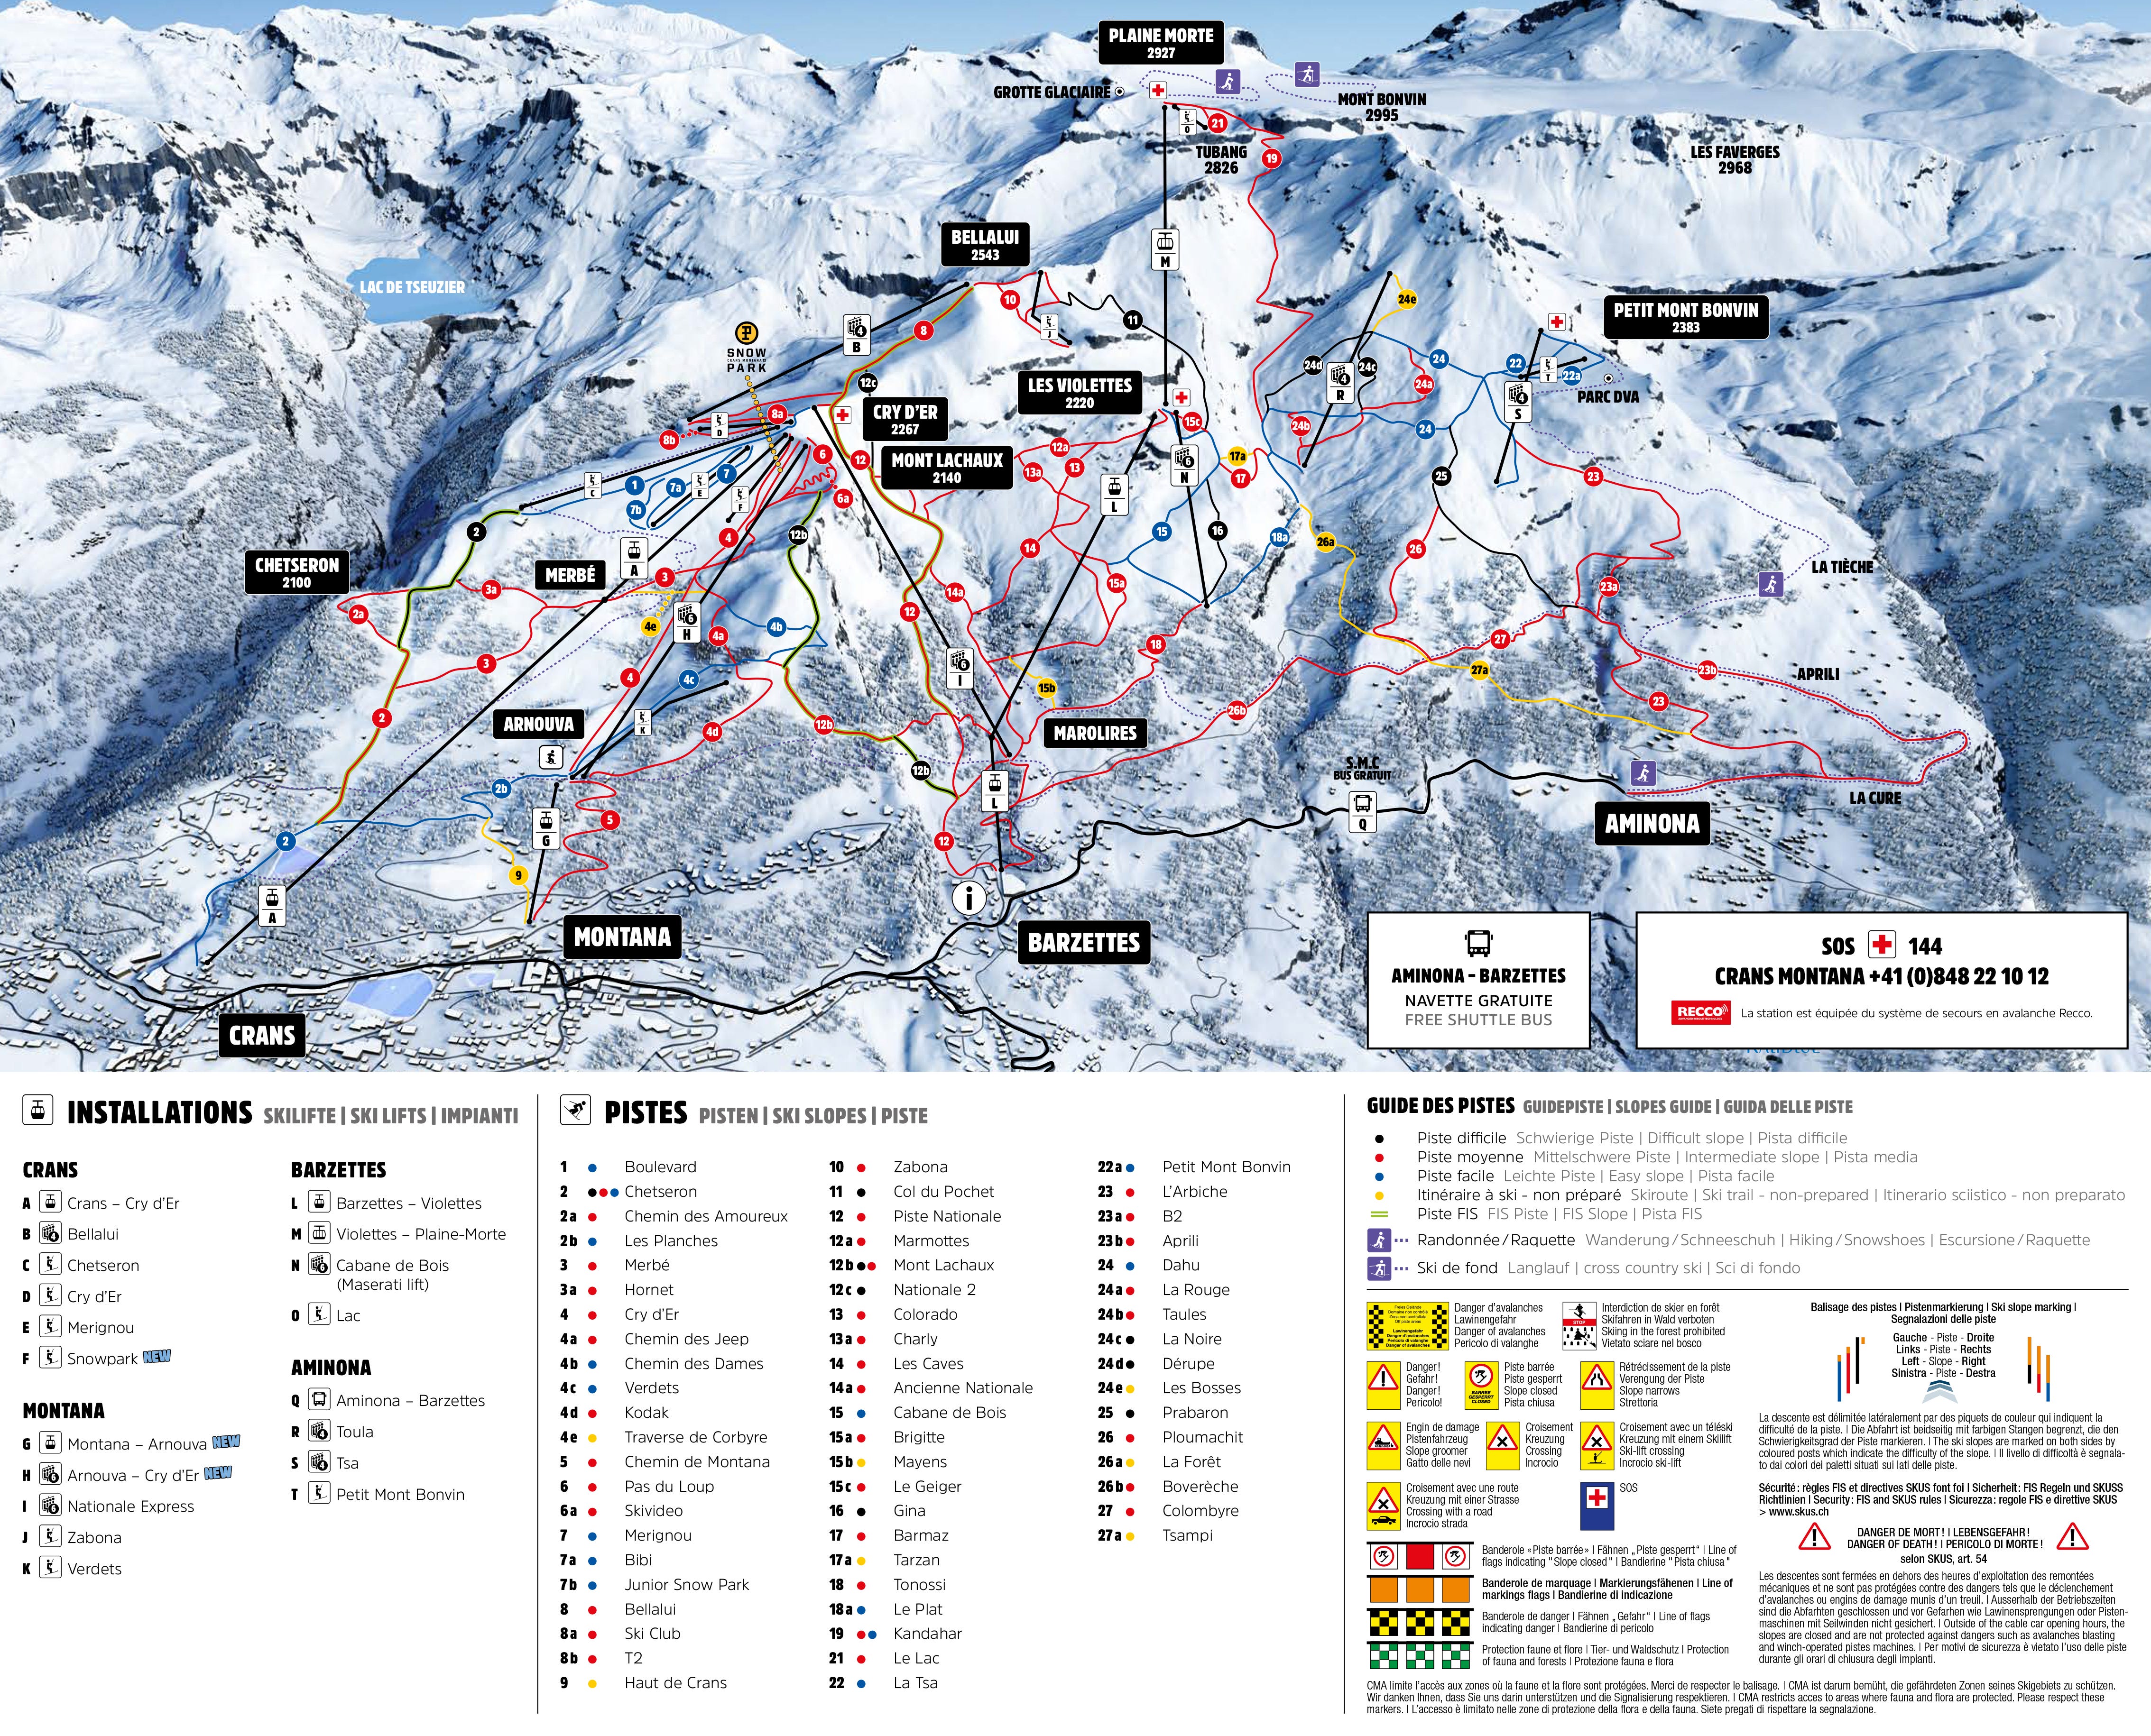 The Ultimate Timeline for Planning the Ski Trip